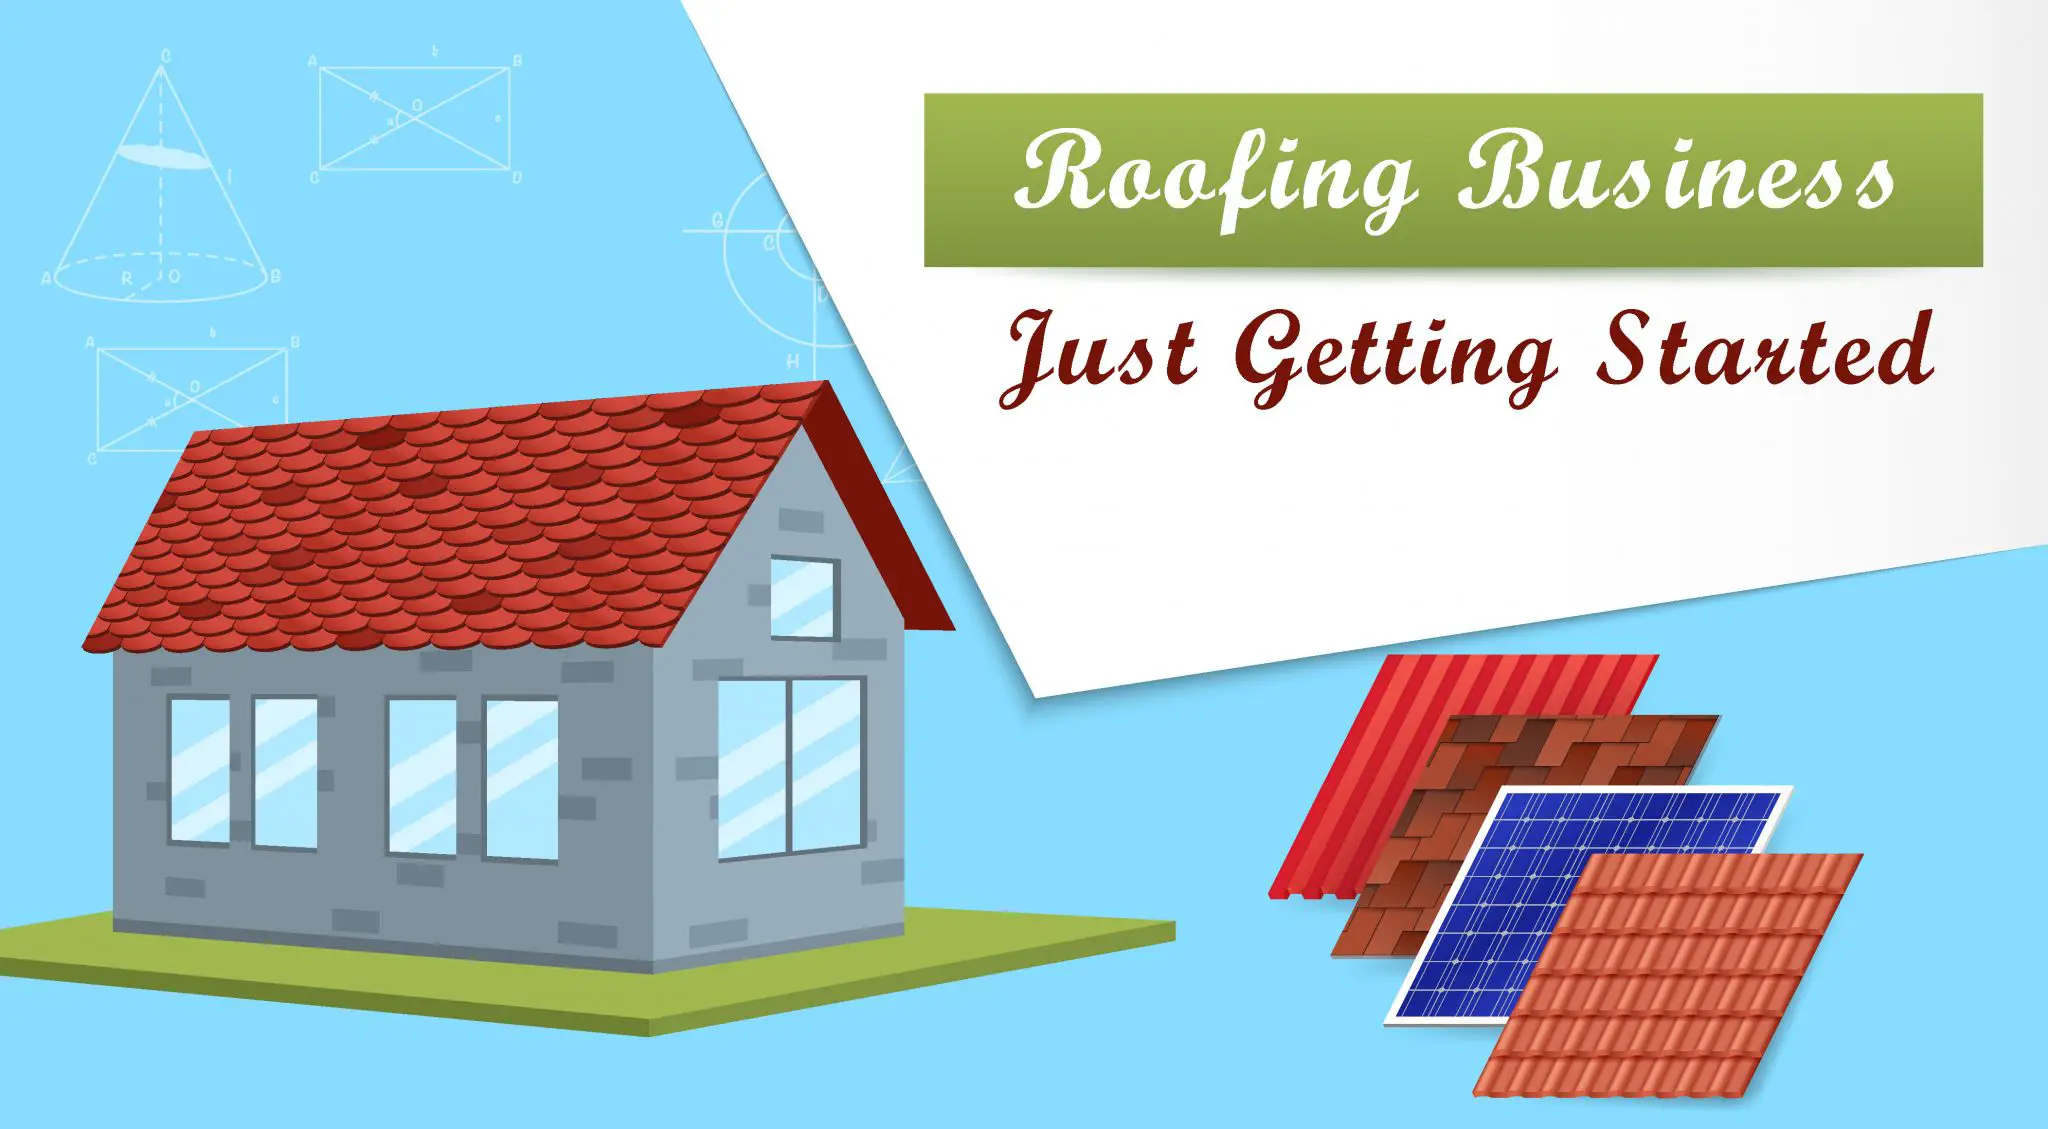 How To Start a Roofing Company: The Ultimate Guide